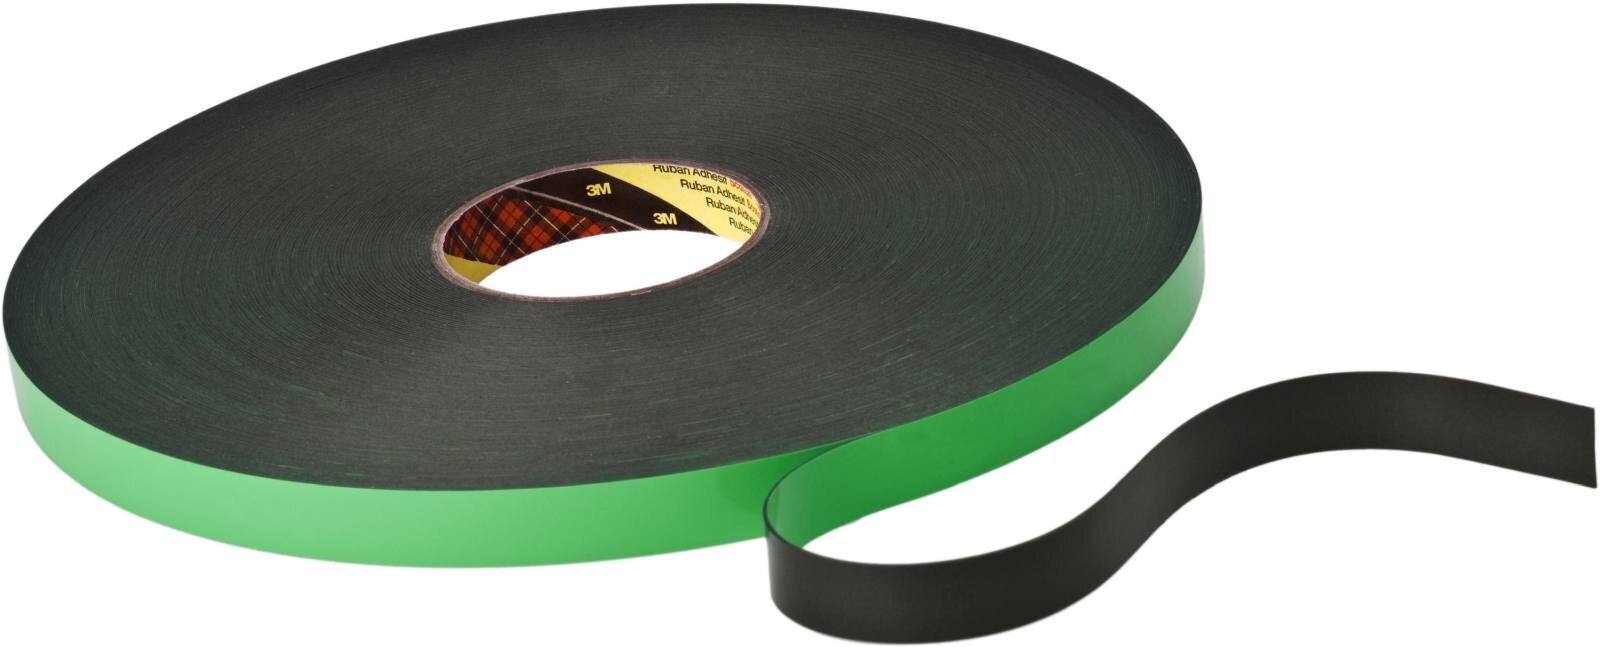 3M Double-sided PE foam adhesive tape with acrylic adhesive 9508B, black, 1500 mm x 66 m, 0.8 mm